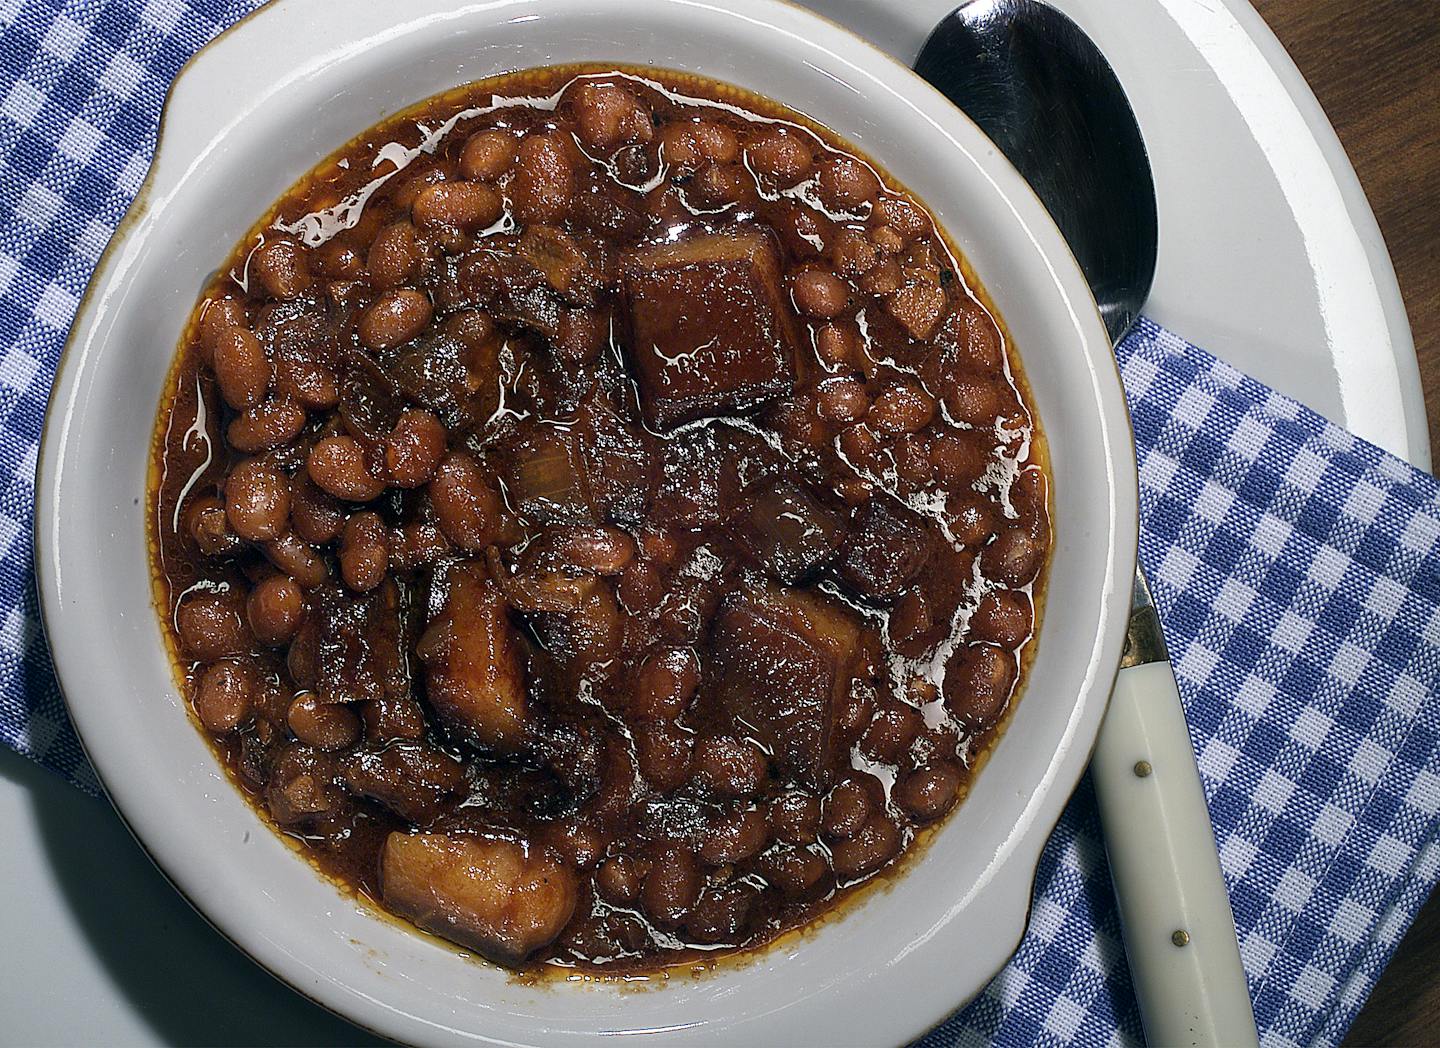 A bowl of gooey brown Boston baked beans